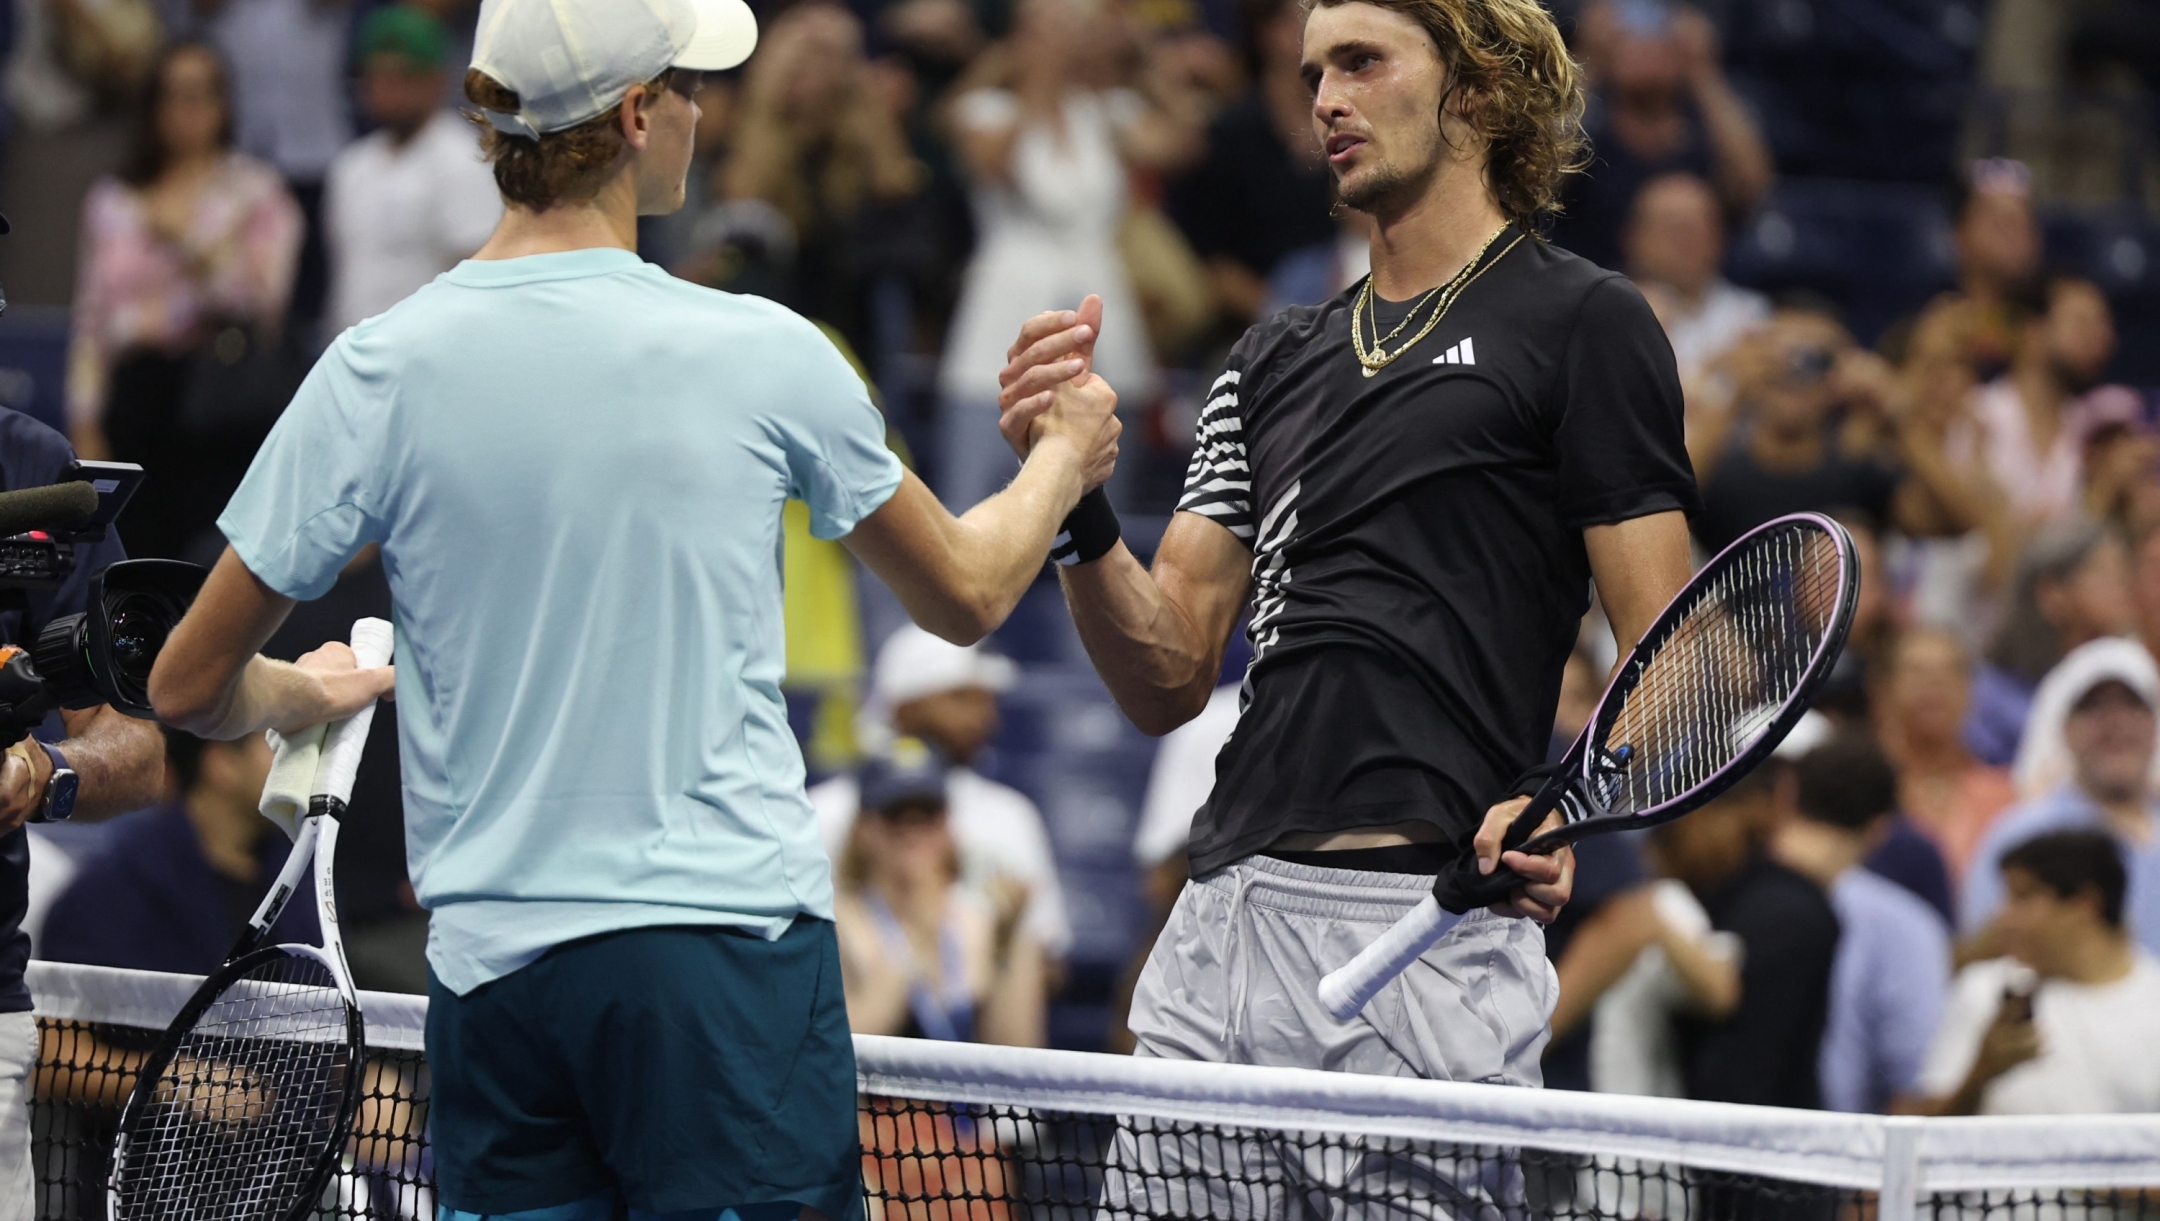 NEW YORK, NEW YORK - SEPTEMBER 04: Alexander Zverev of Germany embraces Jannik Sinner of Italy following their Men's Singles Fourth Round match on Day Eight of the 2023 US Open at the USTA Billie Jean King National Tennis Center on September 04, 2023 in the Flushing neighborhood of the Queens borough of New York City.   Al Bello/Getty Images/AFP (Photo by AL BELLO / GETTY IMAGES NORTH AMERICA / Getty Images via AFP)